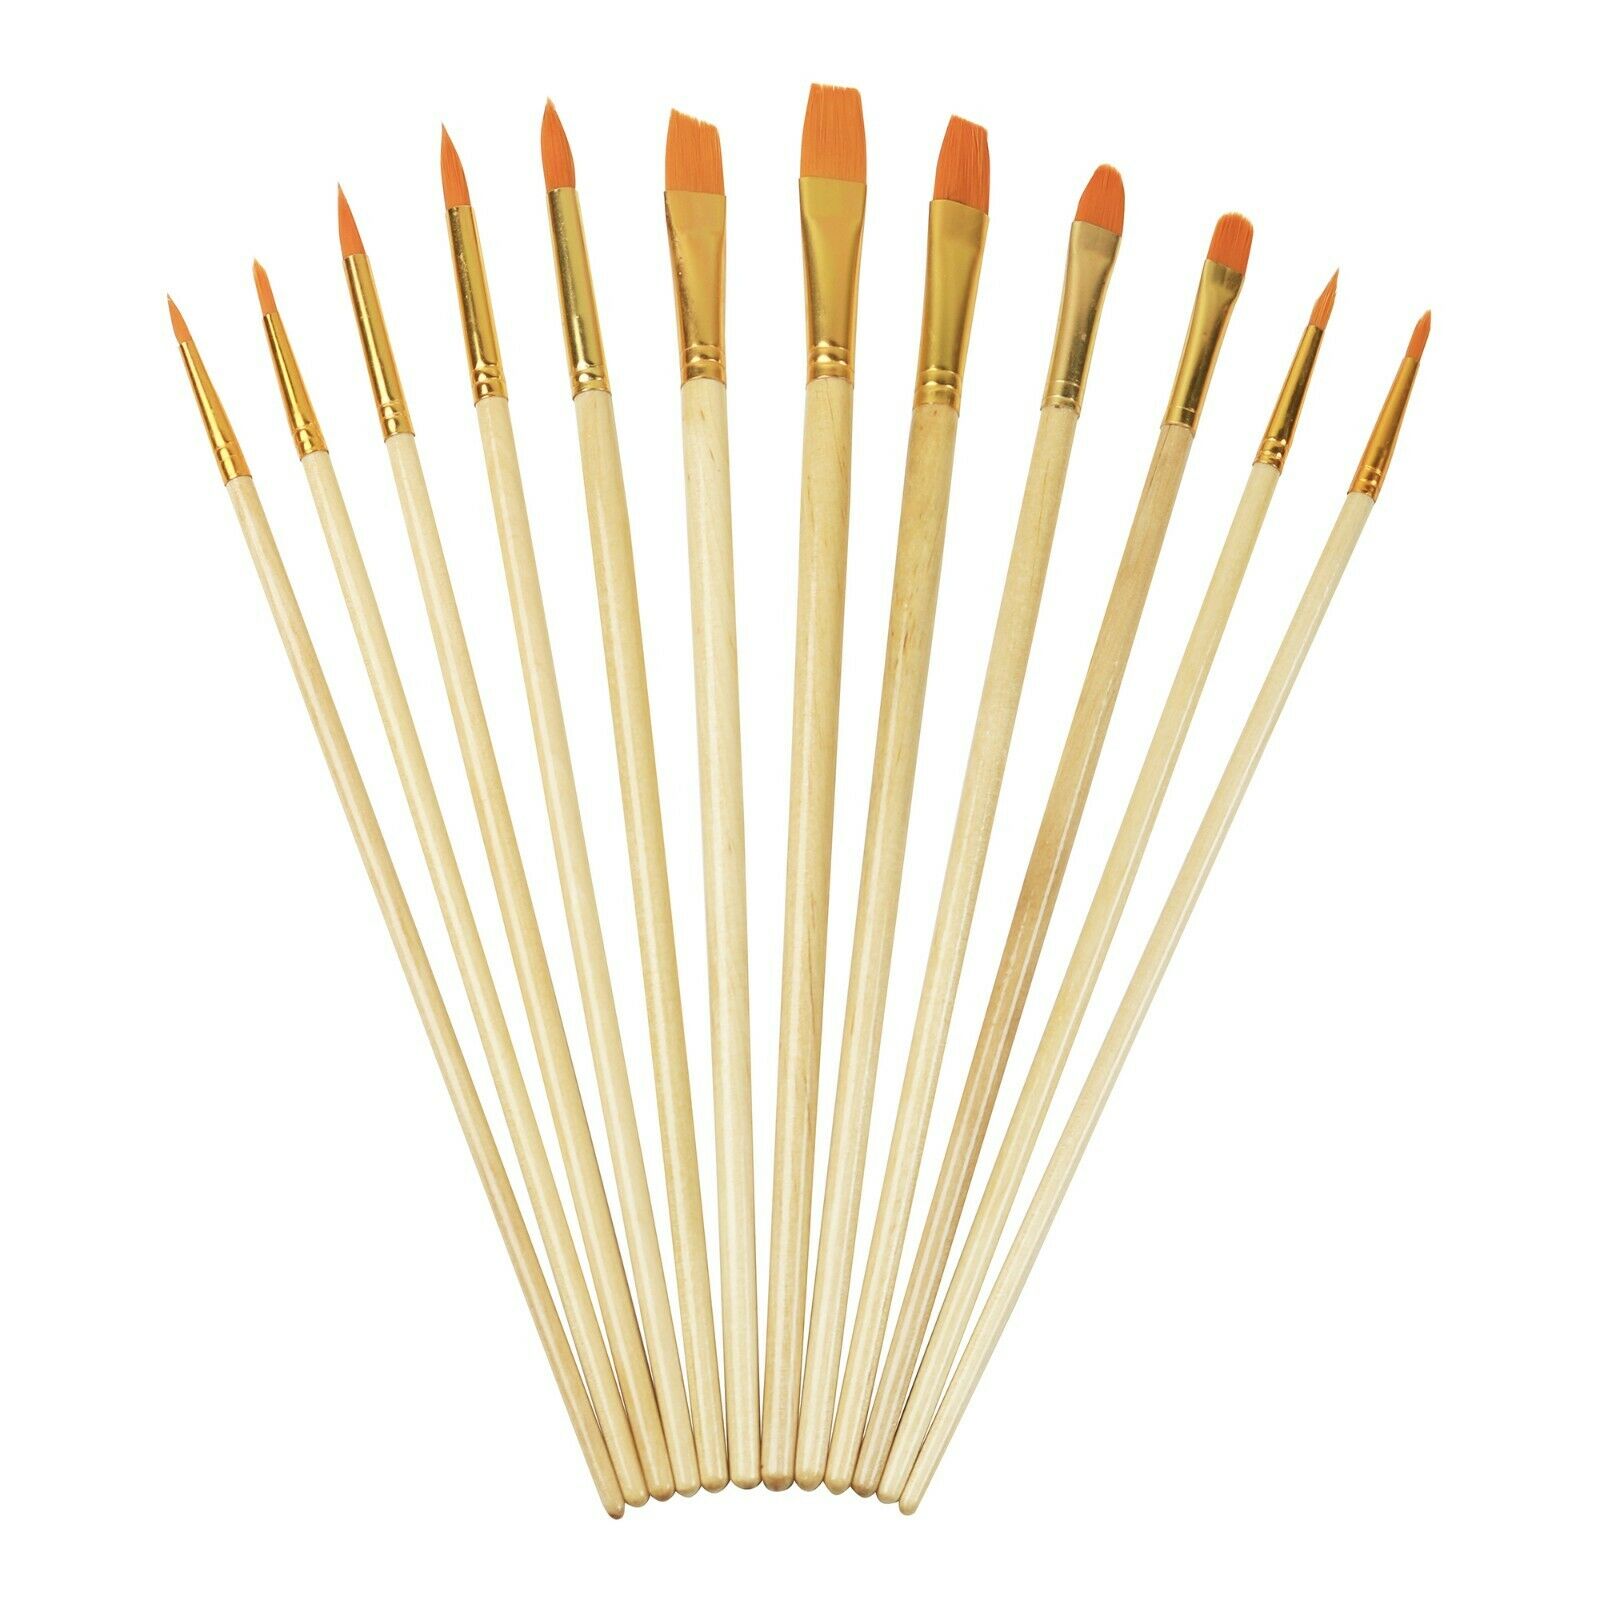 Artist Paint Brush Set, For Professional Watercolor And Acrylic Paint, 12 Pack